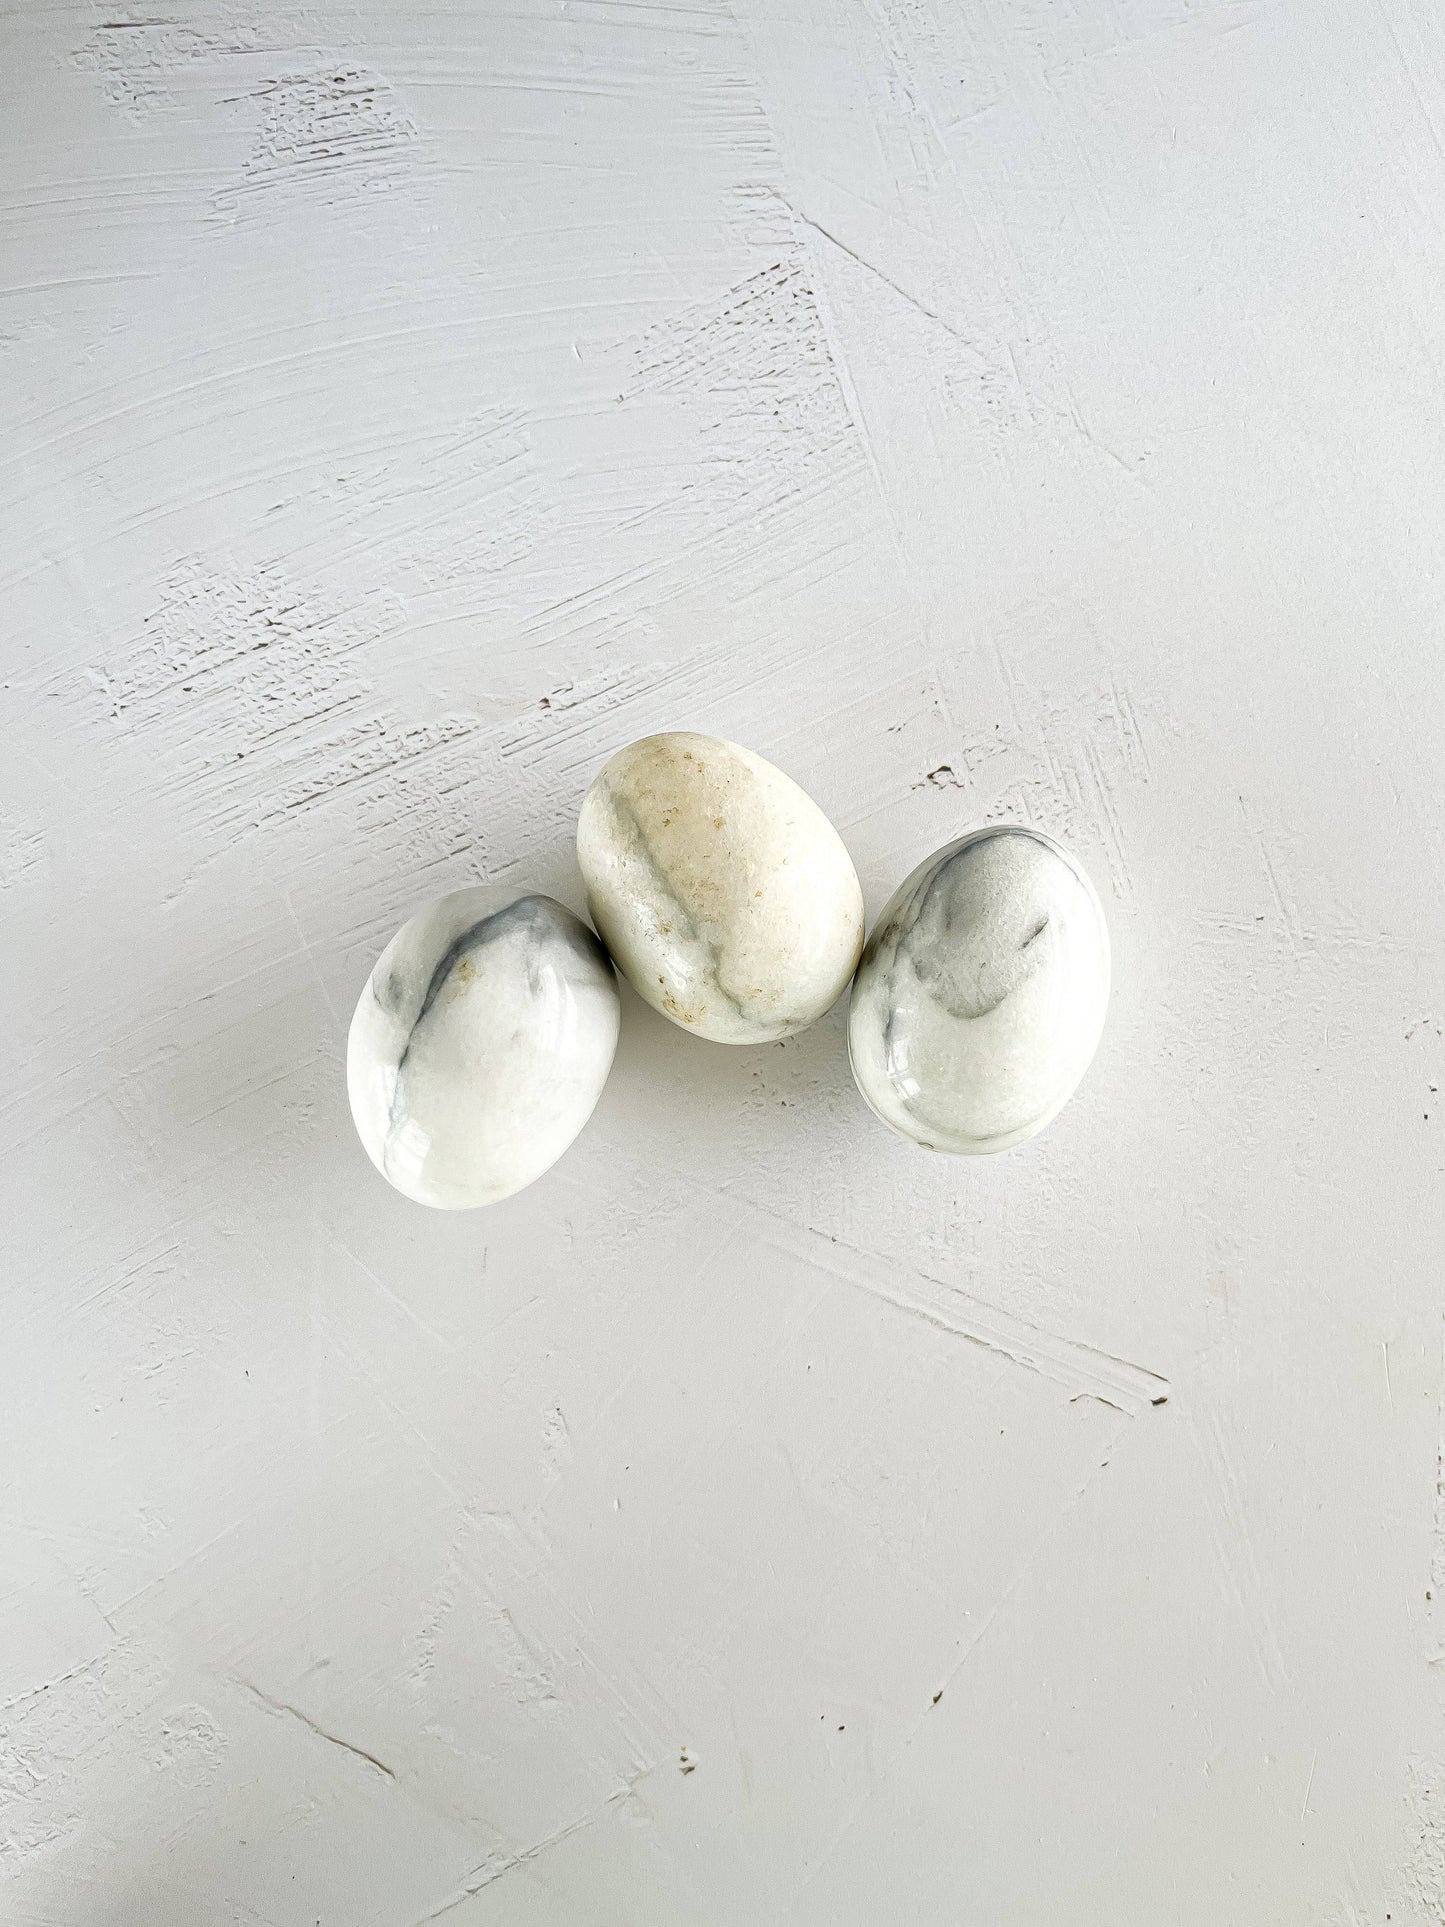 Elegant Set of 3 Decorative Marble Eggs - Unique Patterns of Whites and Greys - SOSC Home